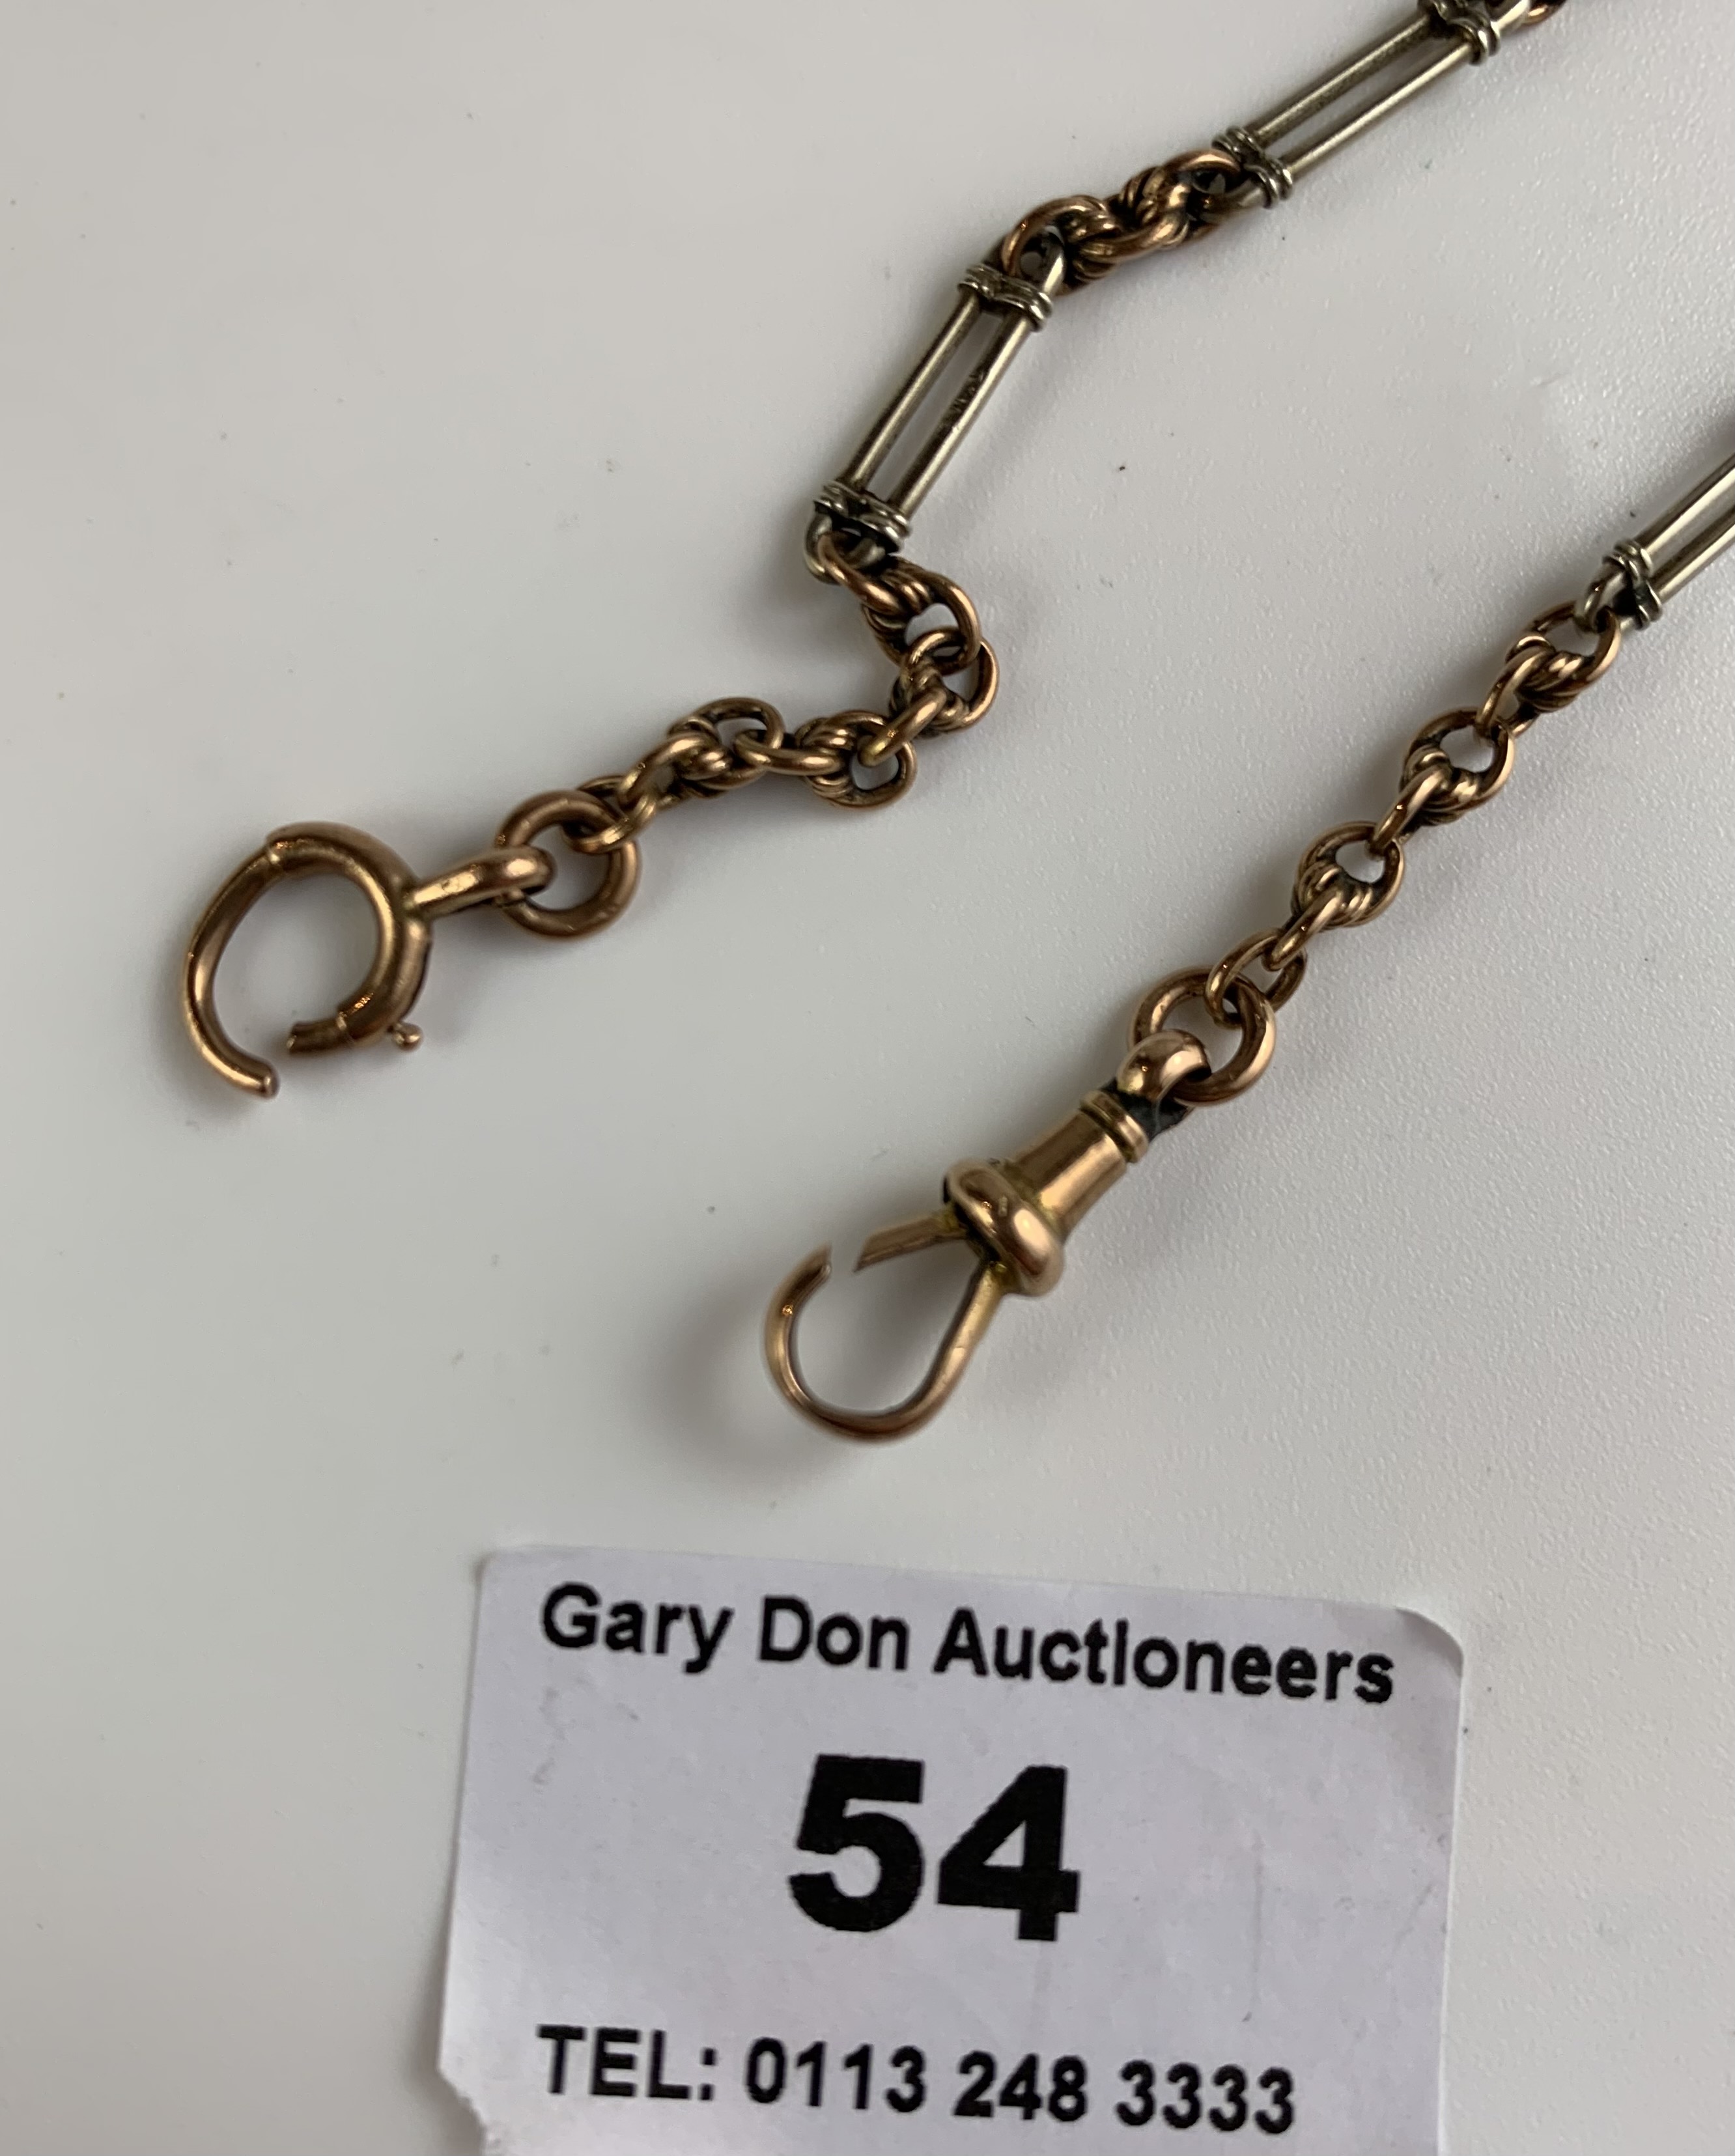 9k gold watch chain, length 14.5”, w: 10.8 gms - Image 3 of 4